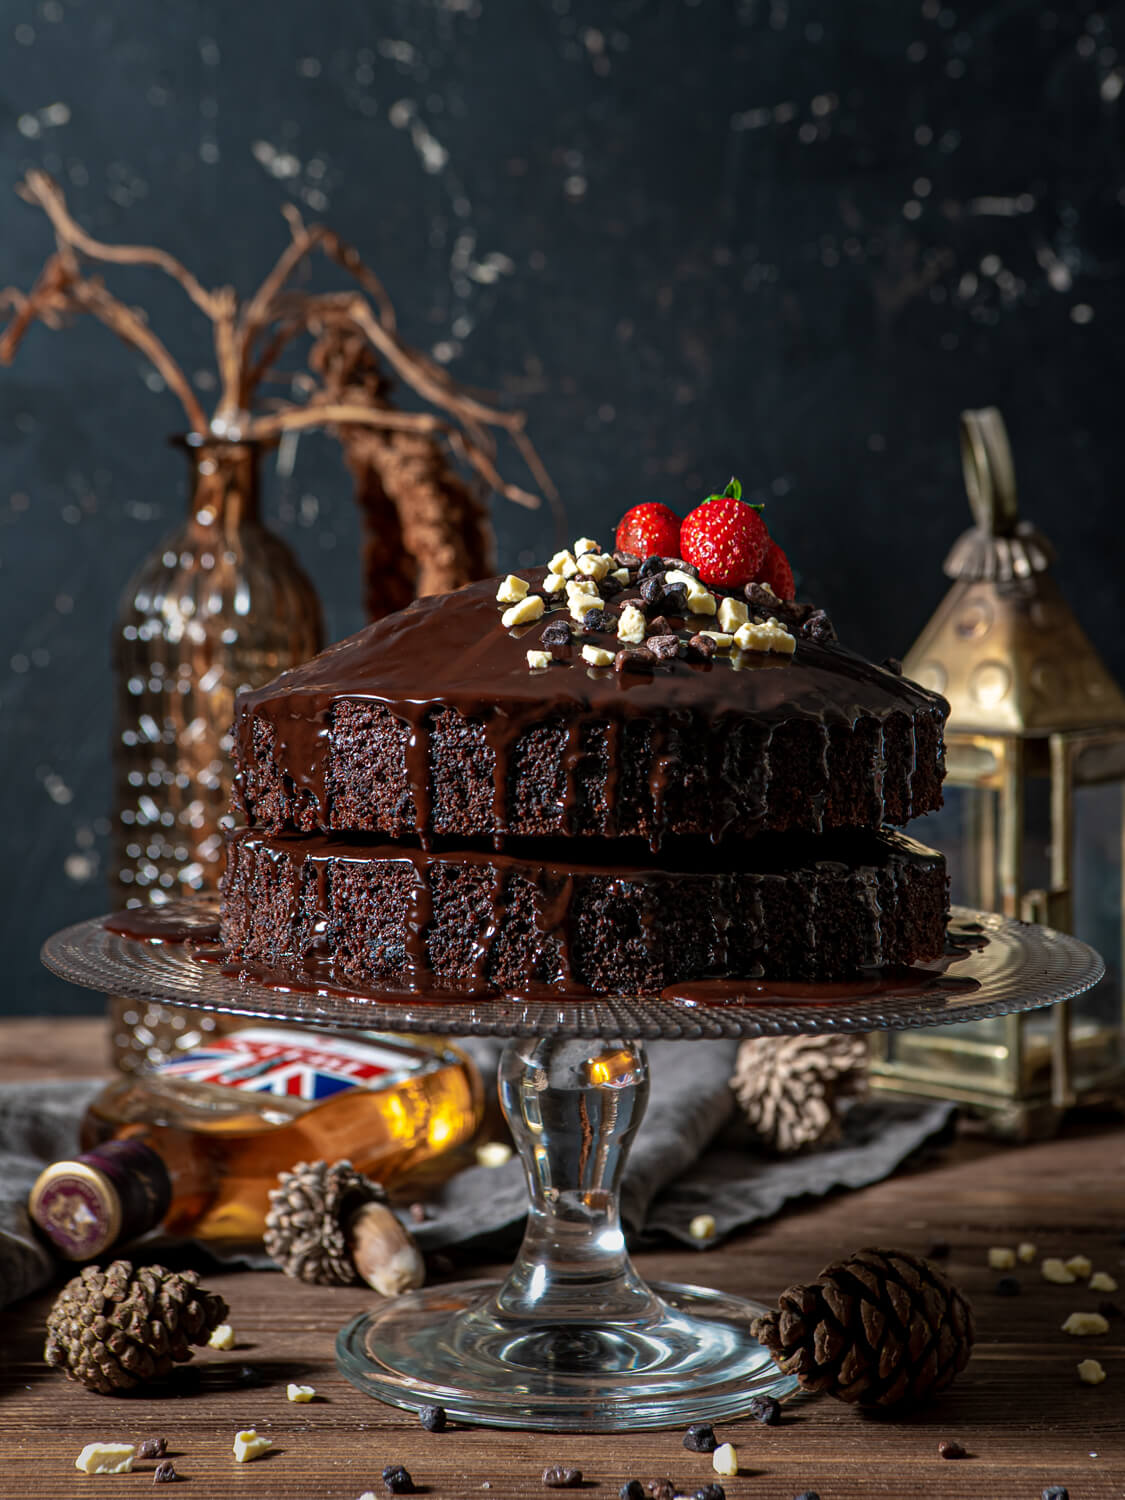 This decadent chocolate whiskey cake is perfect for any celebration! With a rich ganache made from whiskey, this cake is sure to impress.